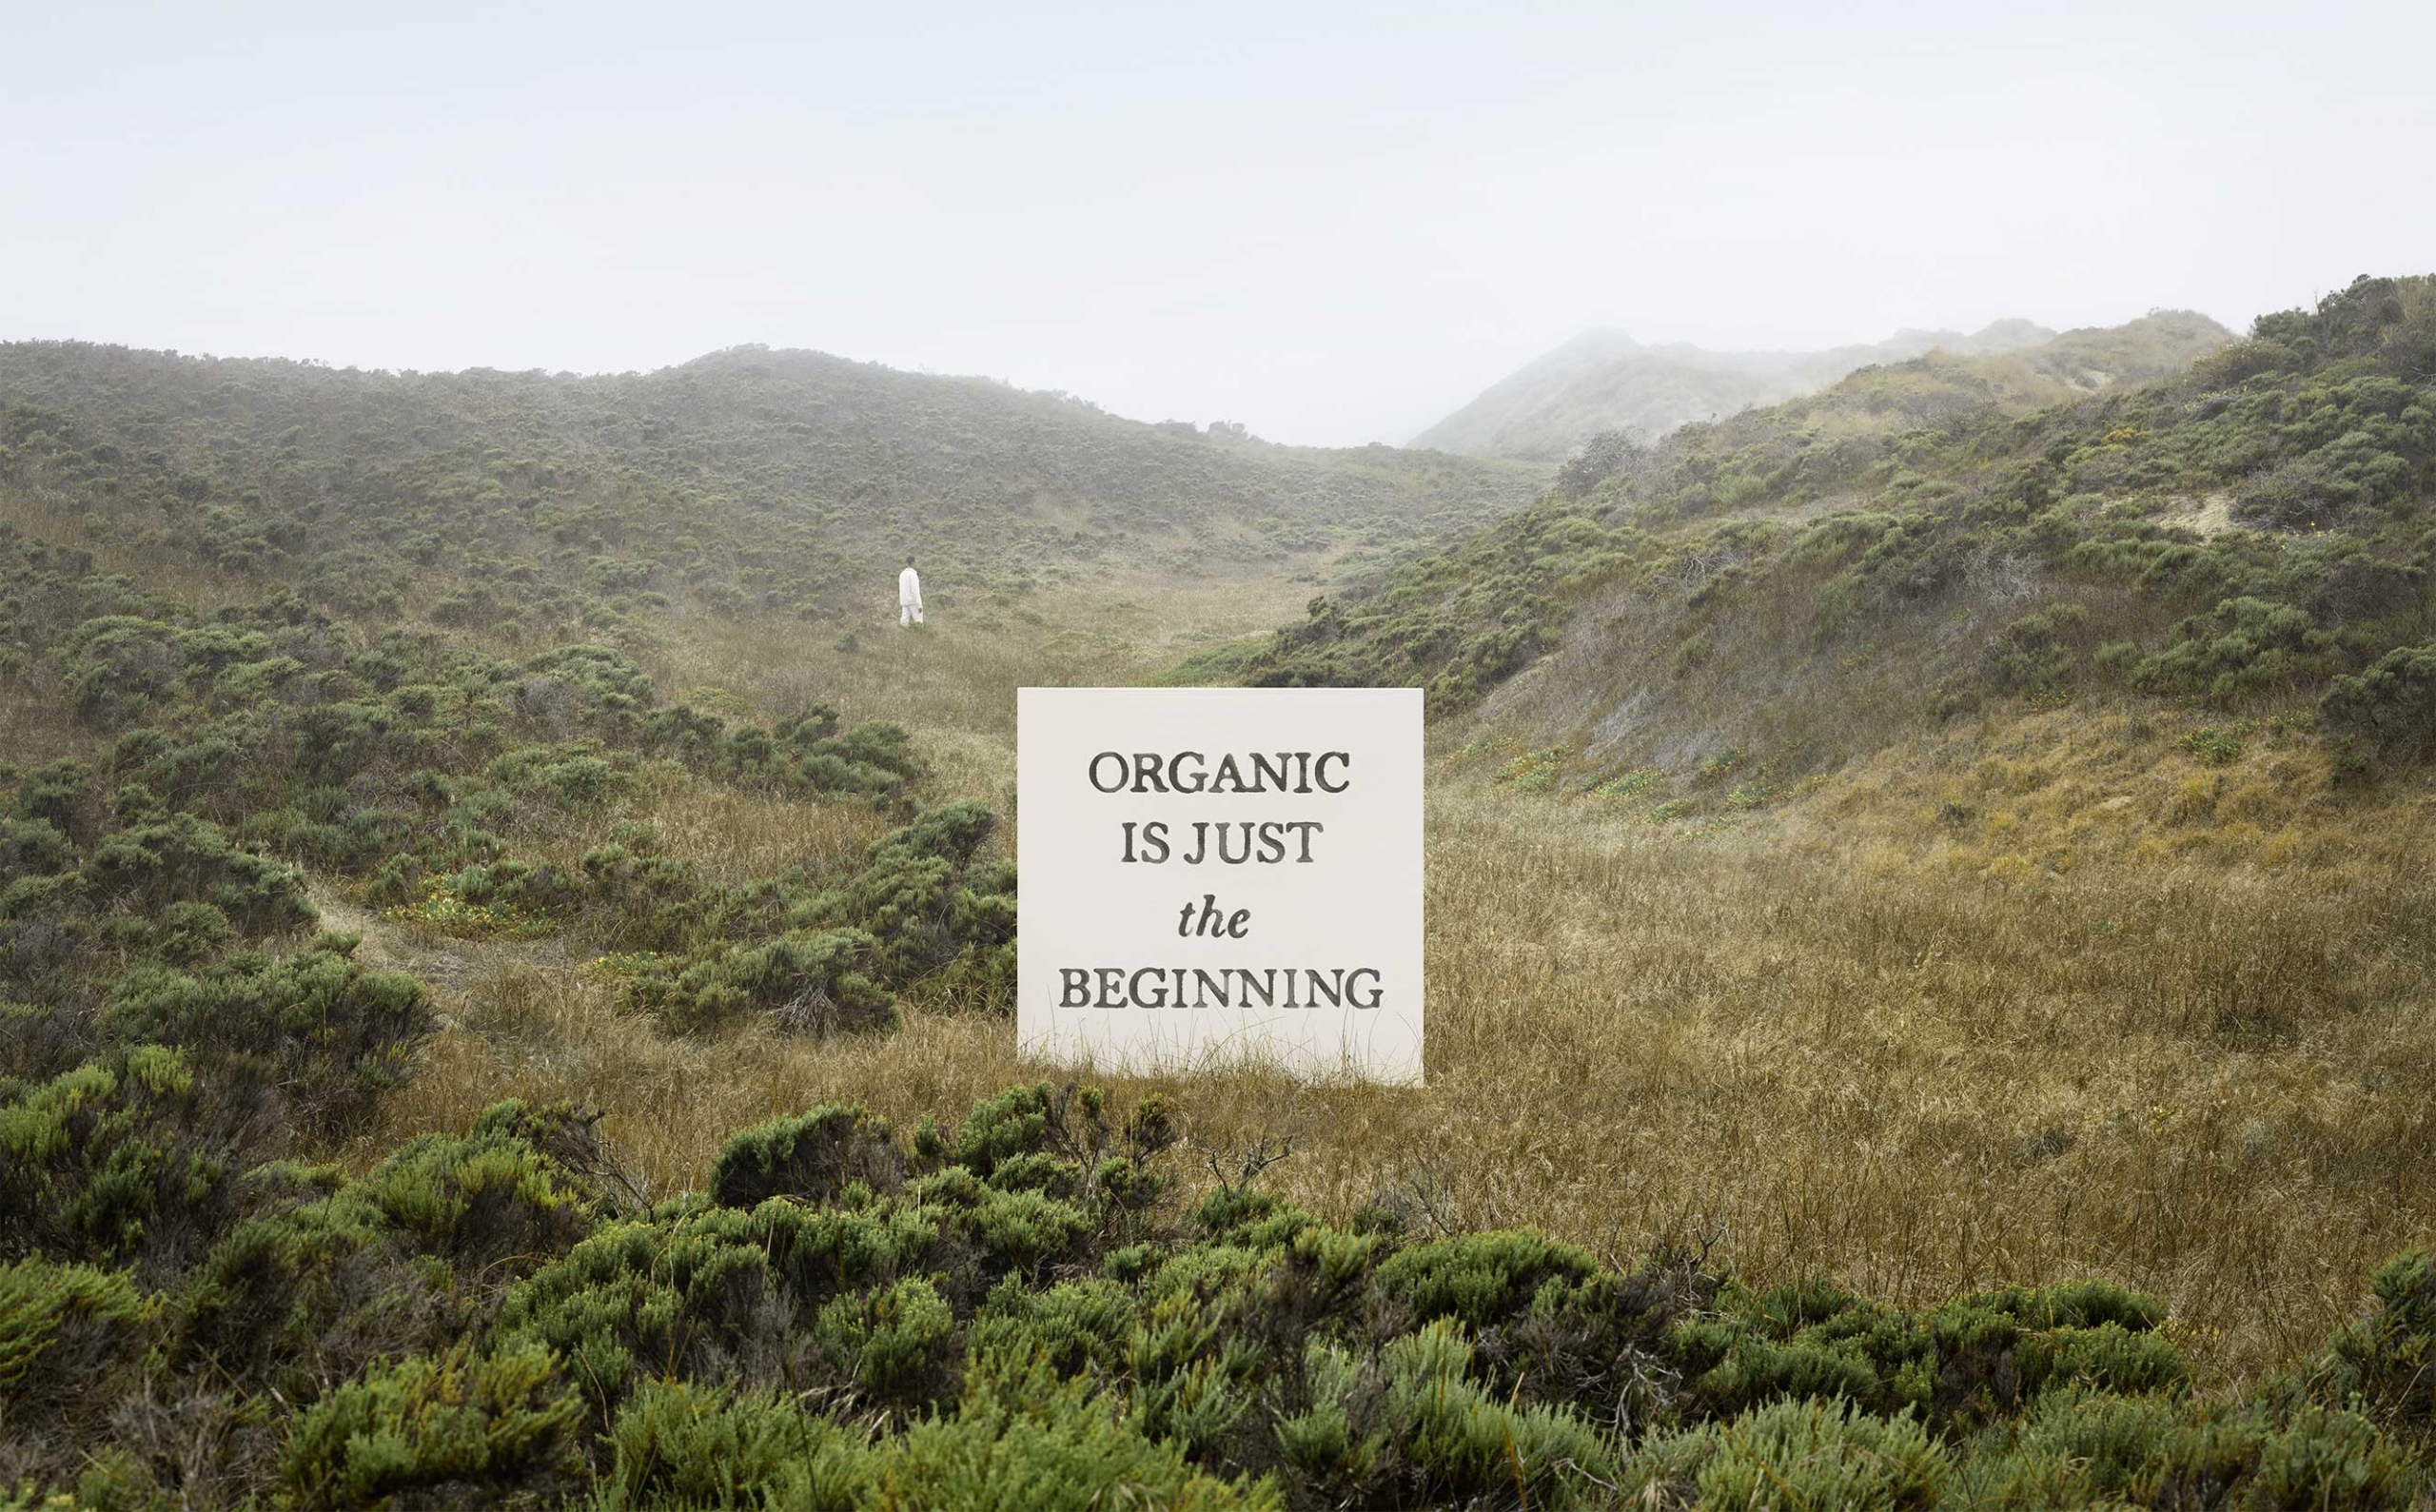 Photo of a green, grassy meadow with a foggy sky shot on the coast of Washington state. A person wearing all white is seen walking in the middle distance with a large, square concrete sign in the near center reading, “Organic is just the beginning”.